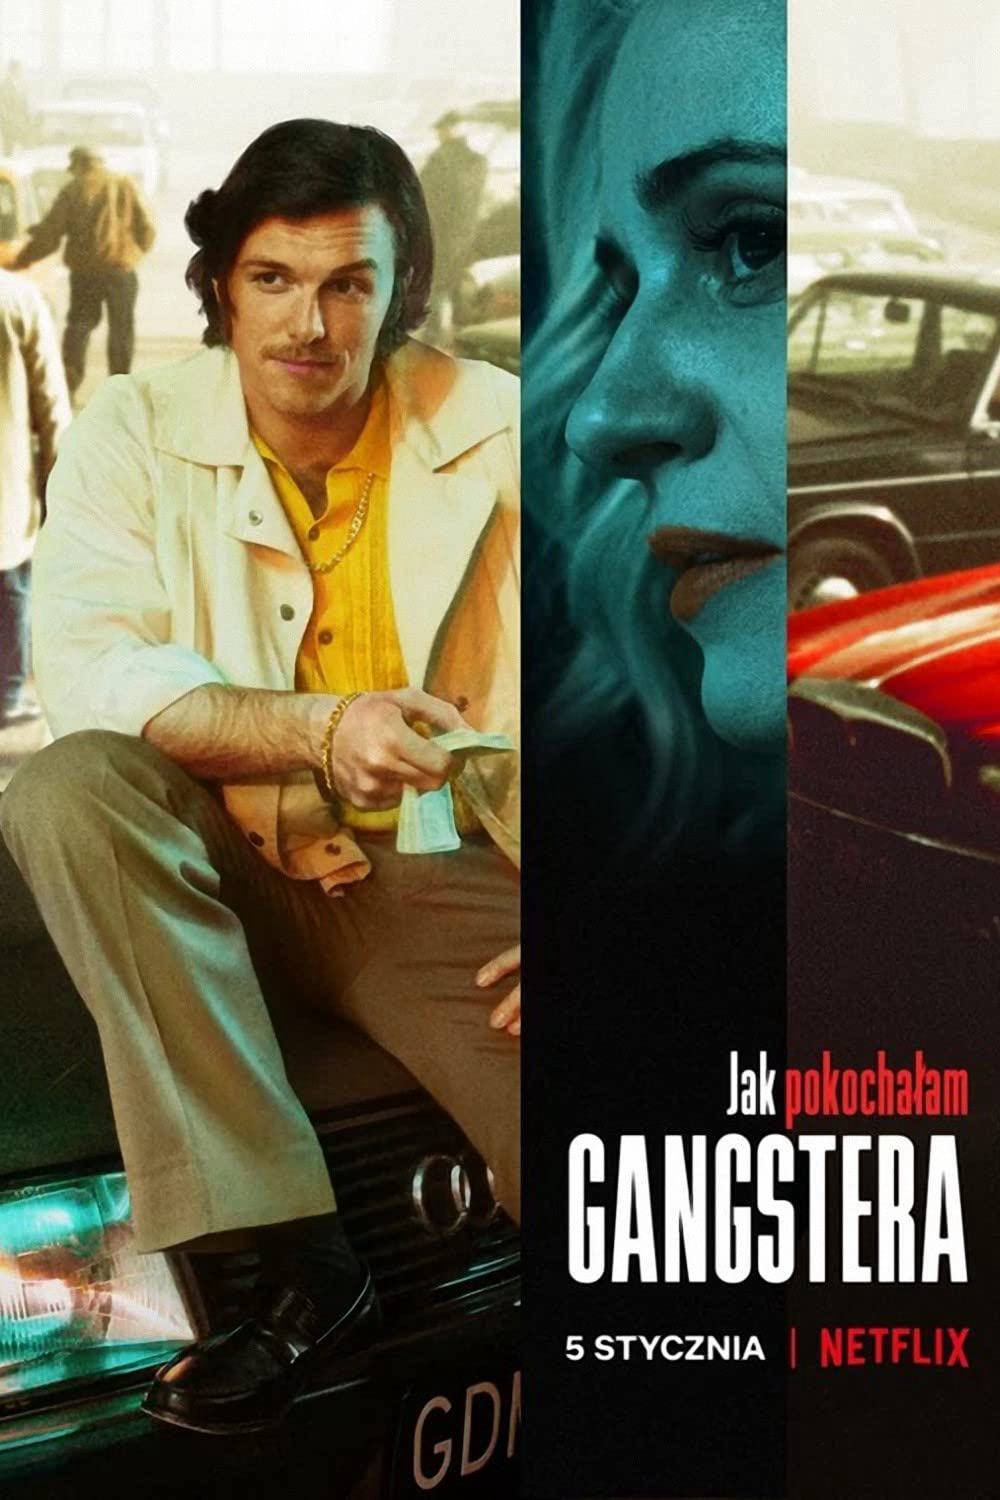 How I Fell in Love with a Gangster - How I Fell in Love with a Gangster